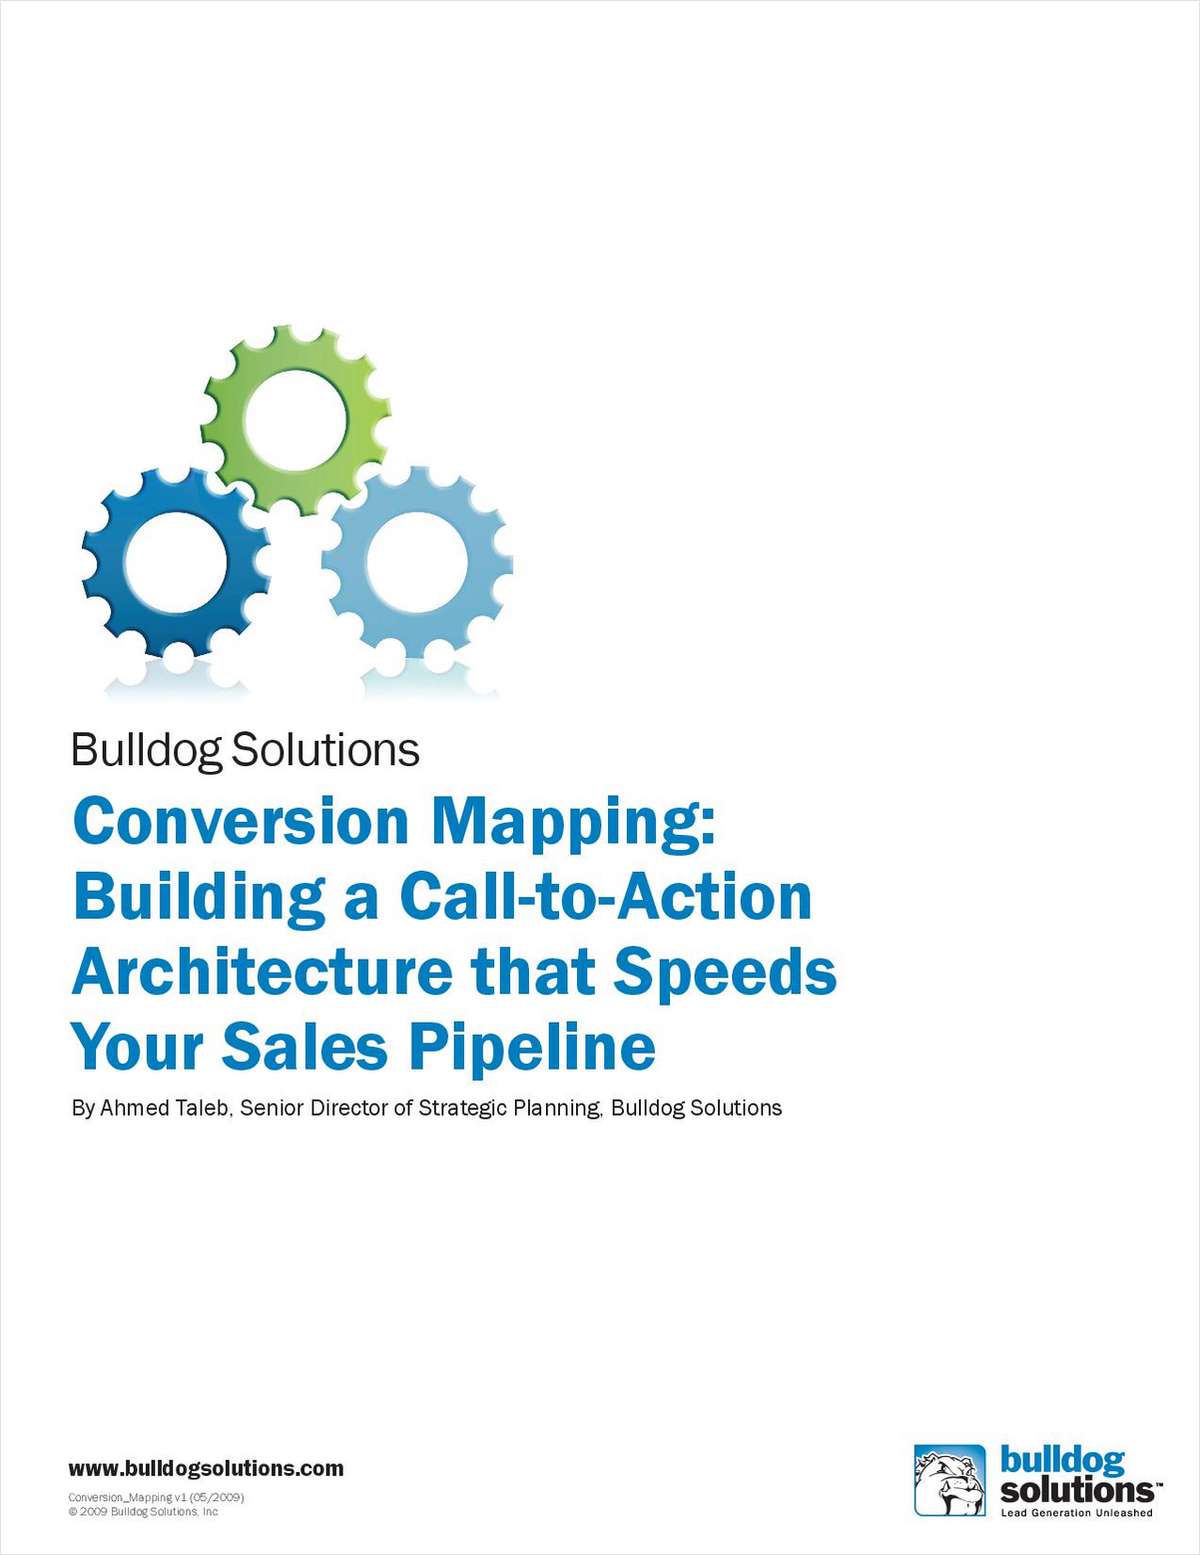 Conversion Mapping: Building a Call-to-Action Architecture that Speeds Your Sales Pipeline